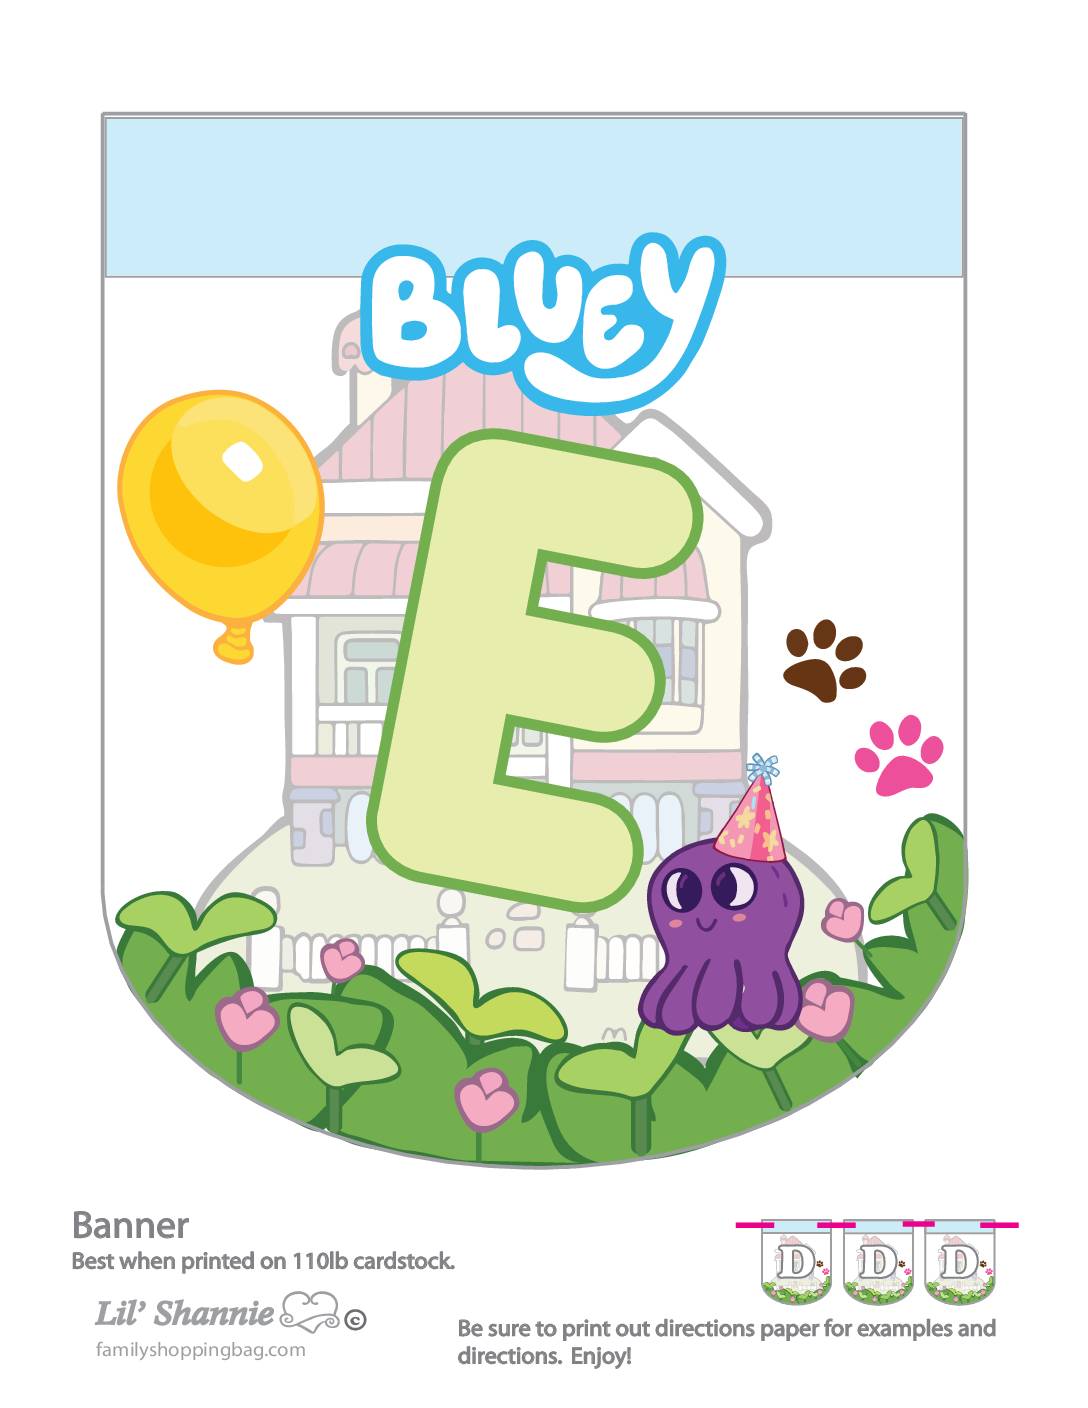 Banner E Bluey Party Banners